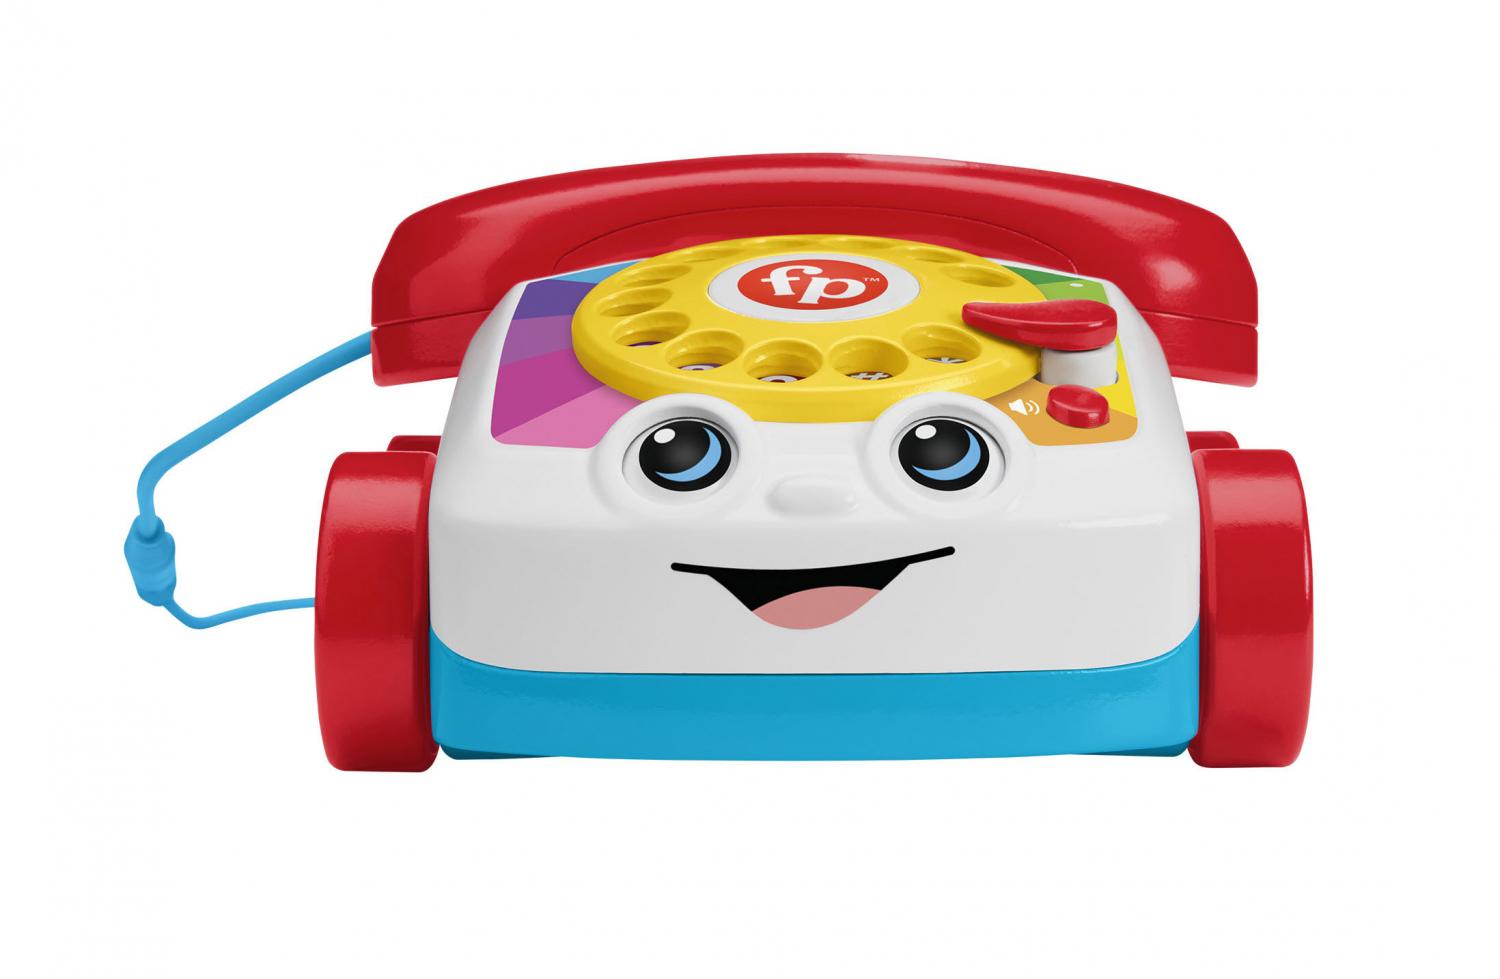 Fisher Price Working Rotary Telephone With Bluetooth - Chatter phone kids toy